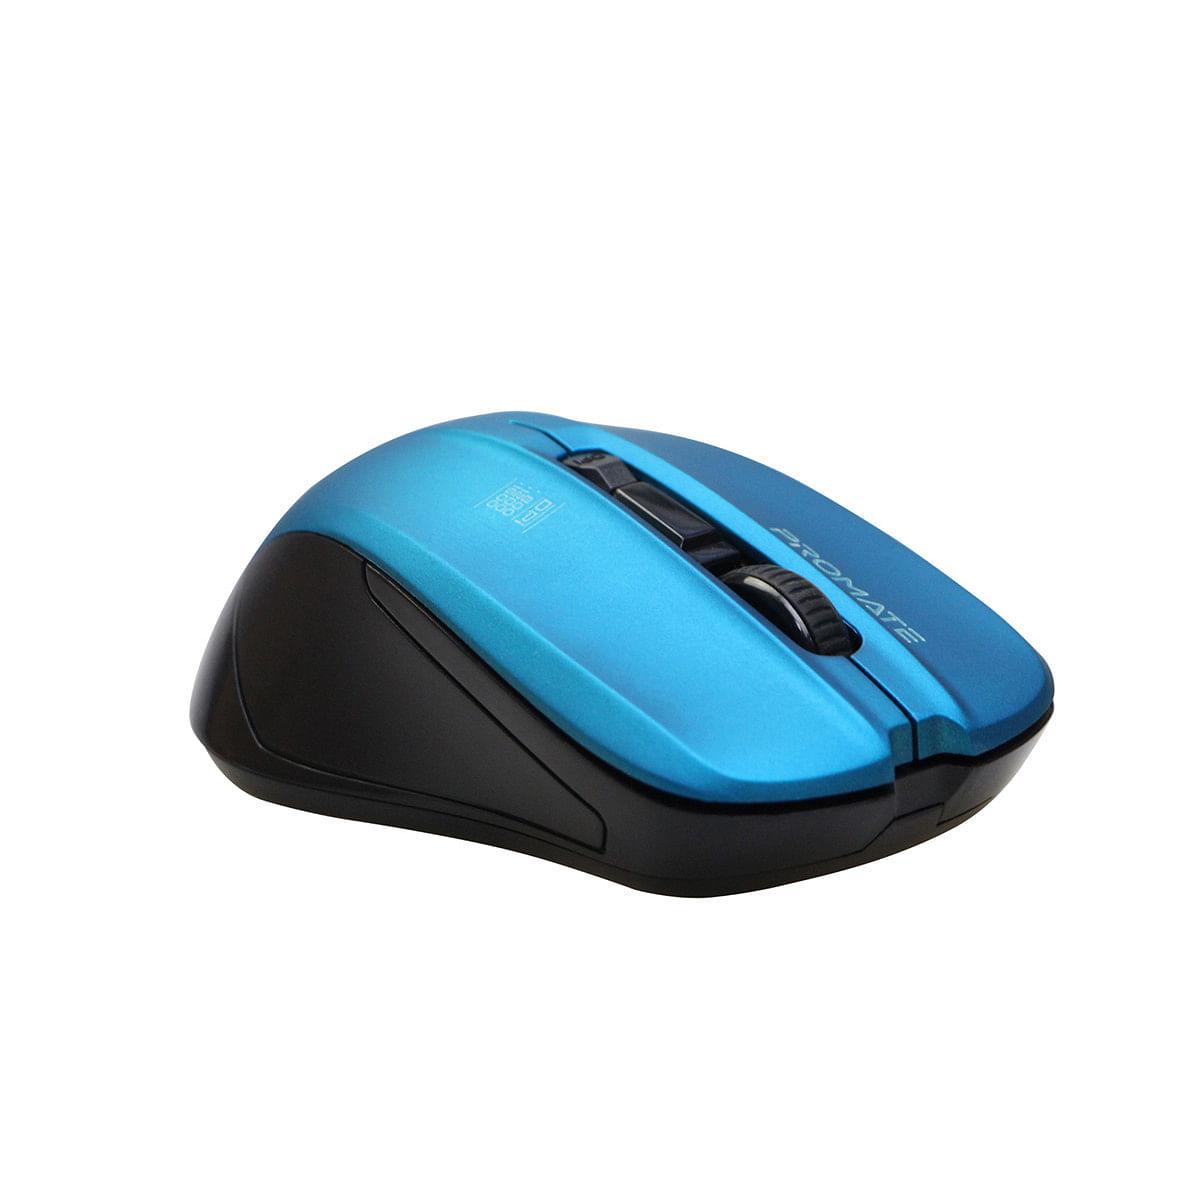 Promate Wireless Mouse, Comfortable Ambidextrous 2.4GHz Cordless Ergonomic Mice with 4 Programmable Buttons, Adjustable 1600DPI, Nano USB Receiver and 10m Working Range for Laptops, Contour Blue